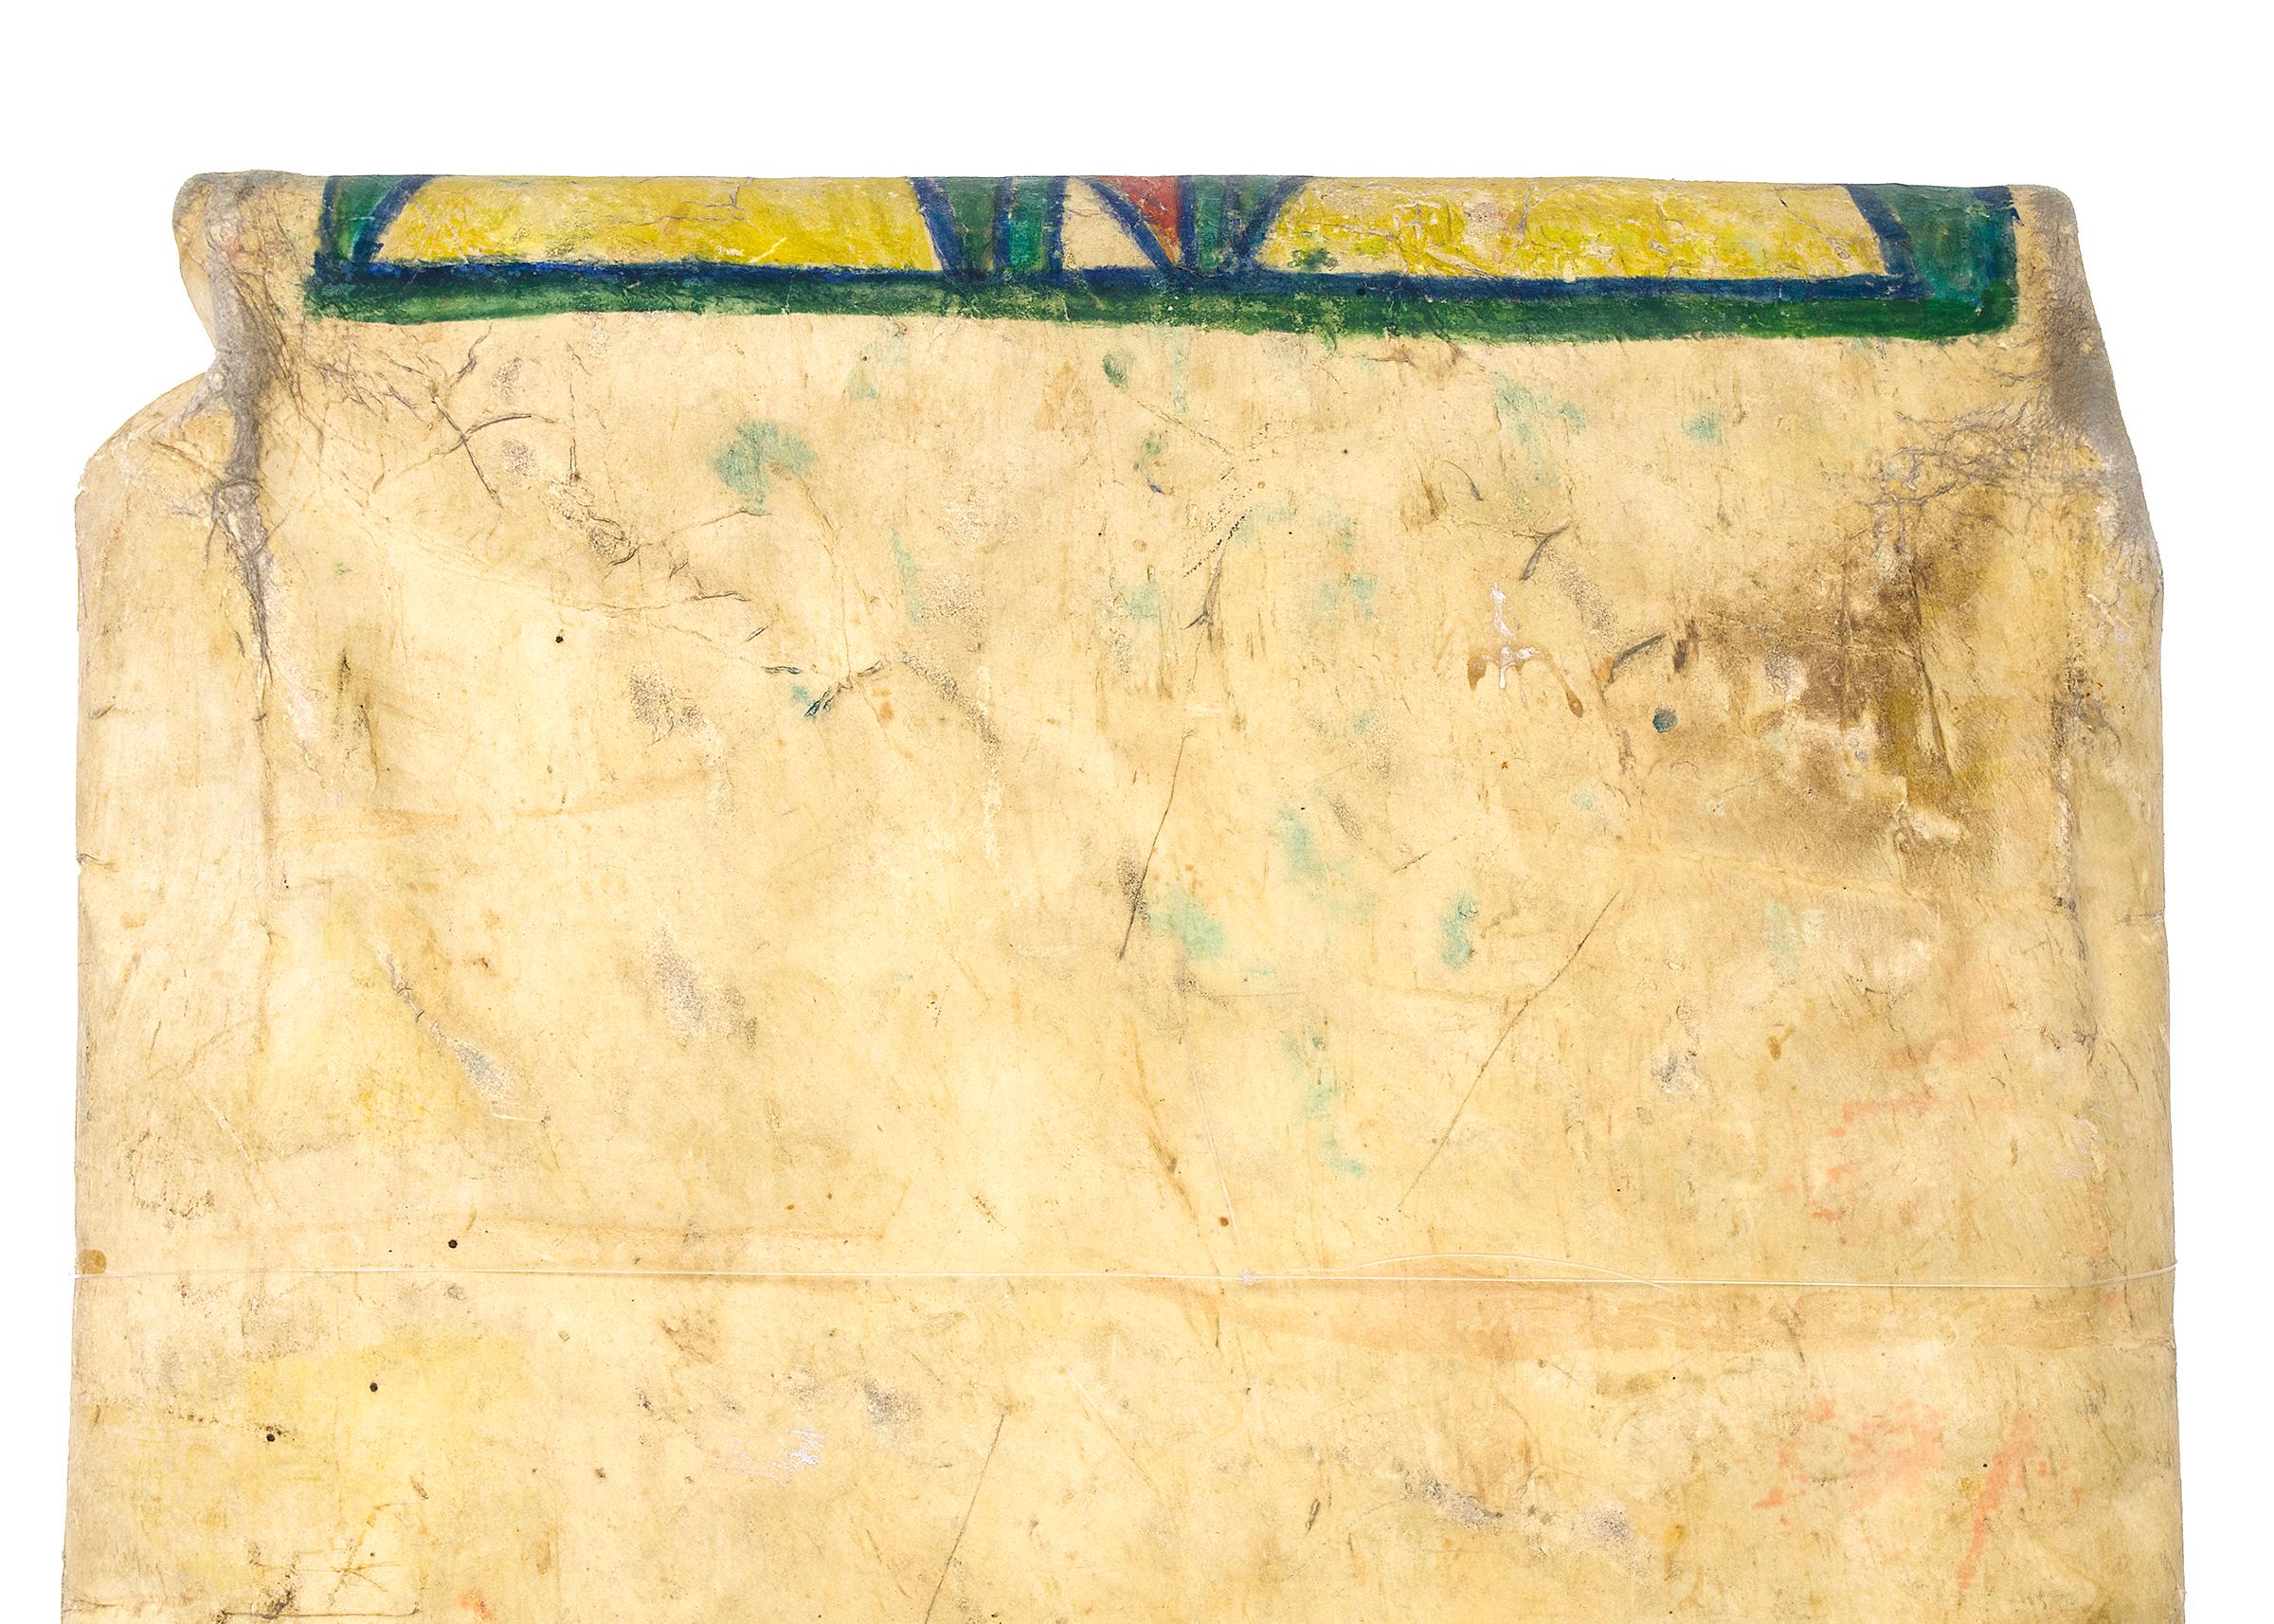 Hand-Painted Native American Parfleche Envelope, Crow, 19th Century Abstract Painting